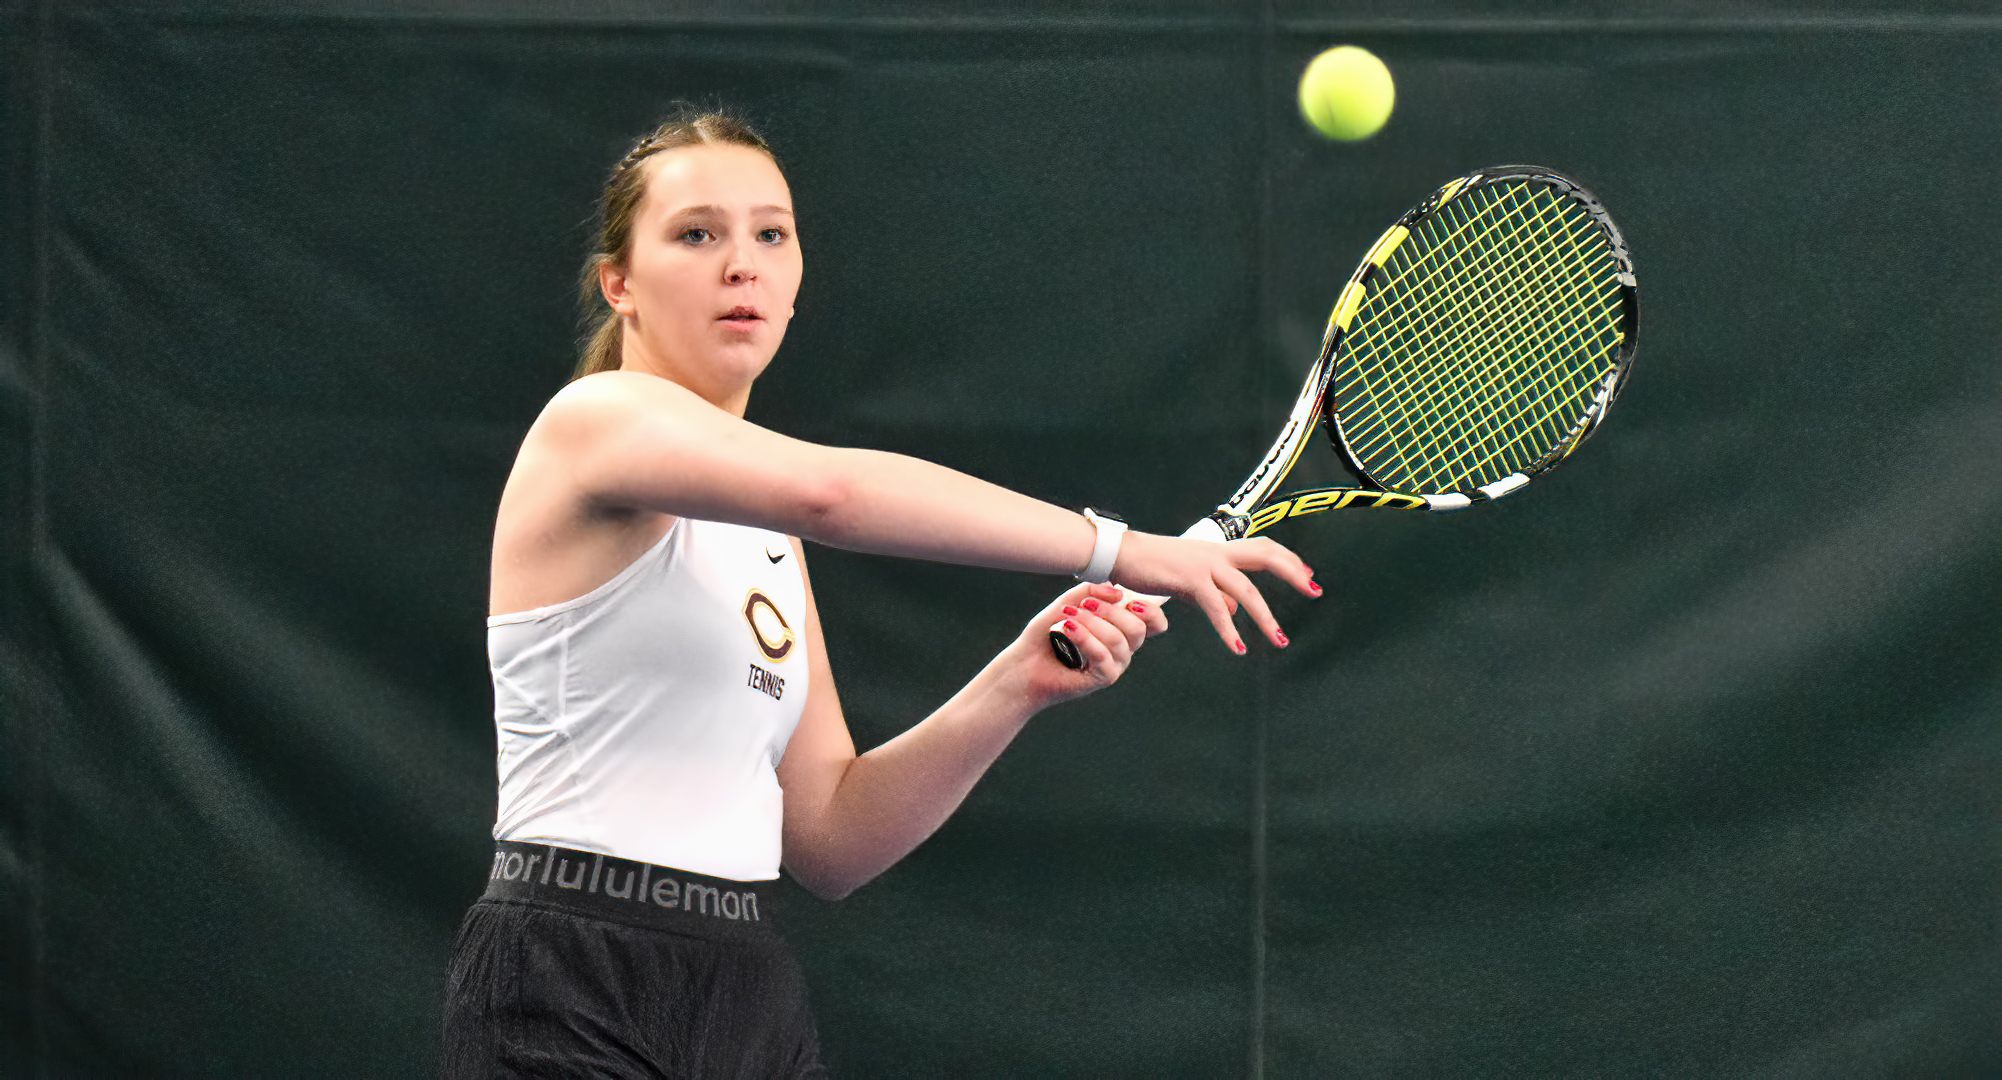 Freshman Kathleen Thompson gets ready to hit a forehand during her No.6 singles match in the Cobbers' 9-0 win against Crown.